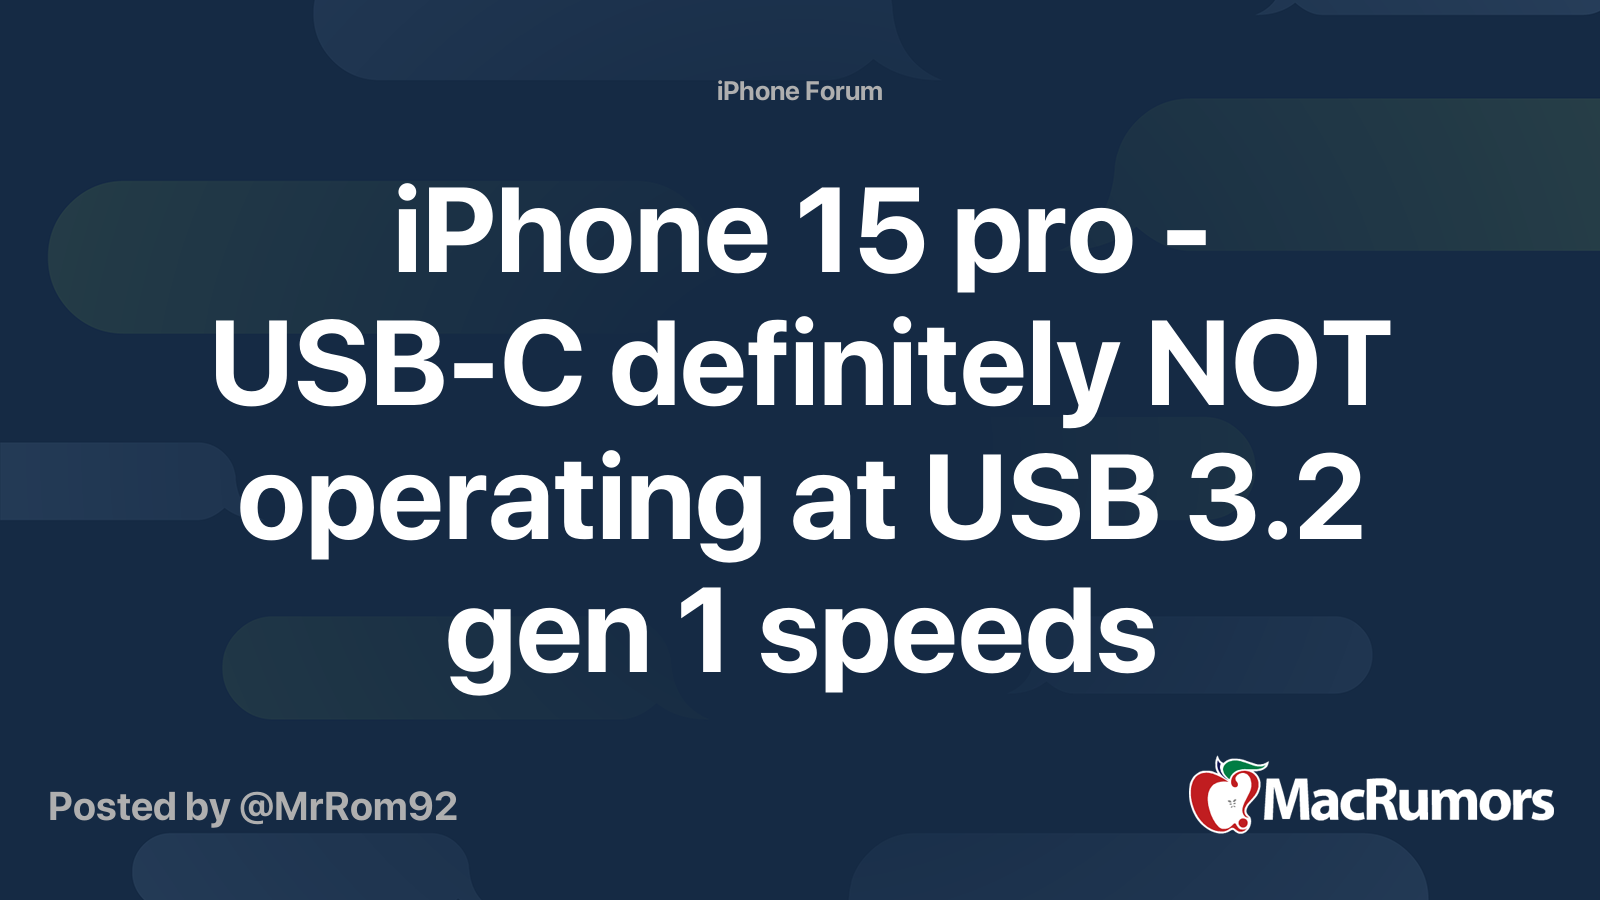 Apple adds USB 3 speeds to iPhone 15 Pro but you won't get those